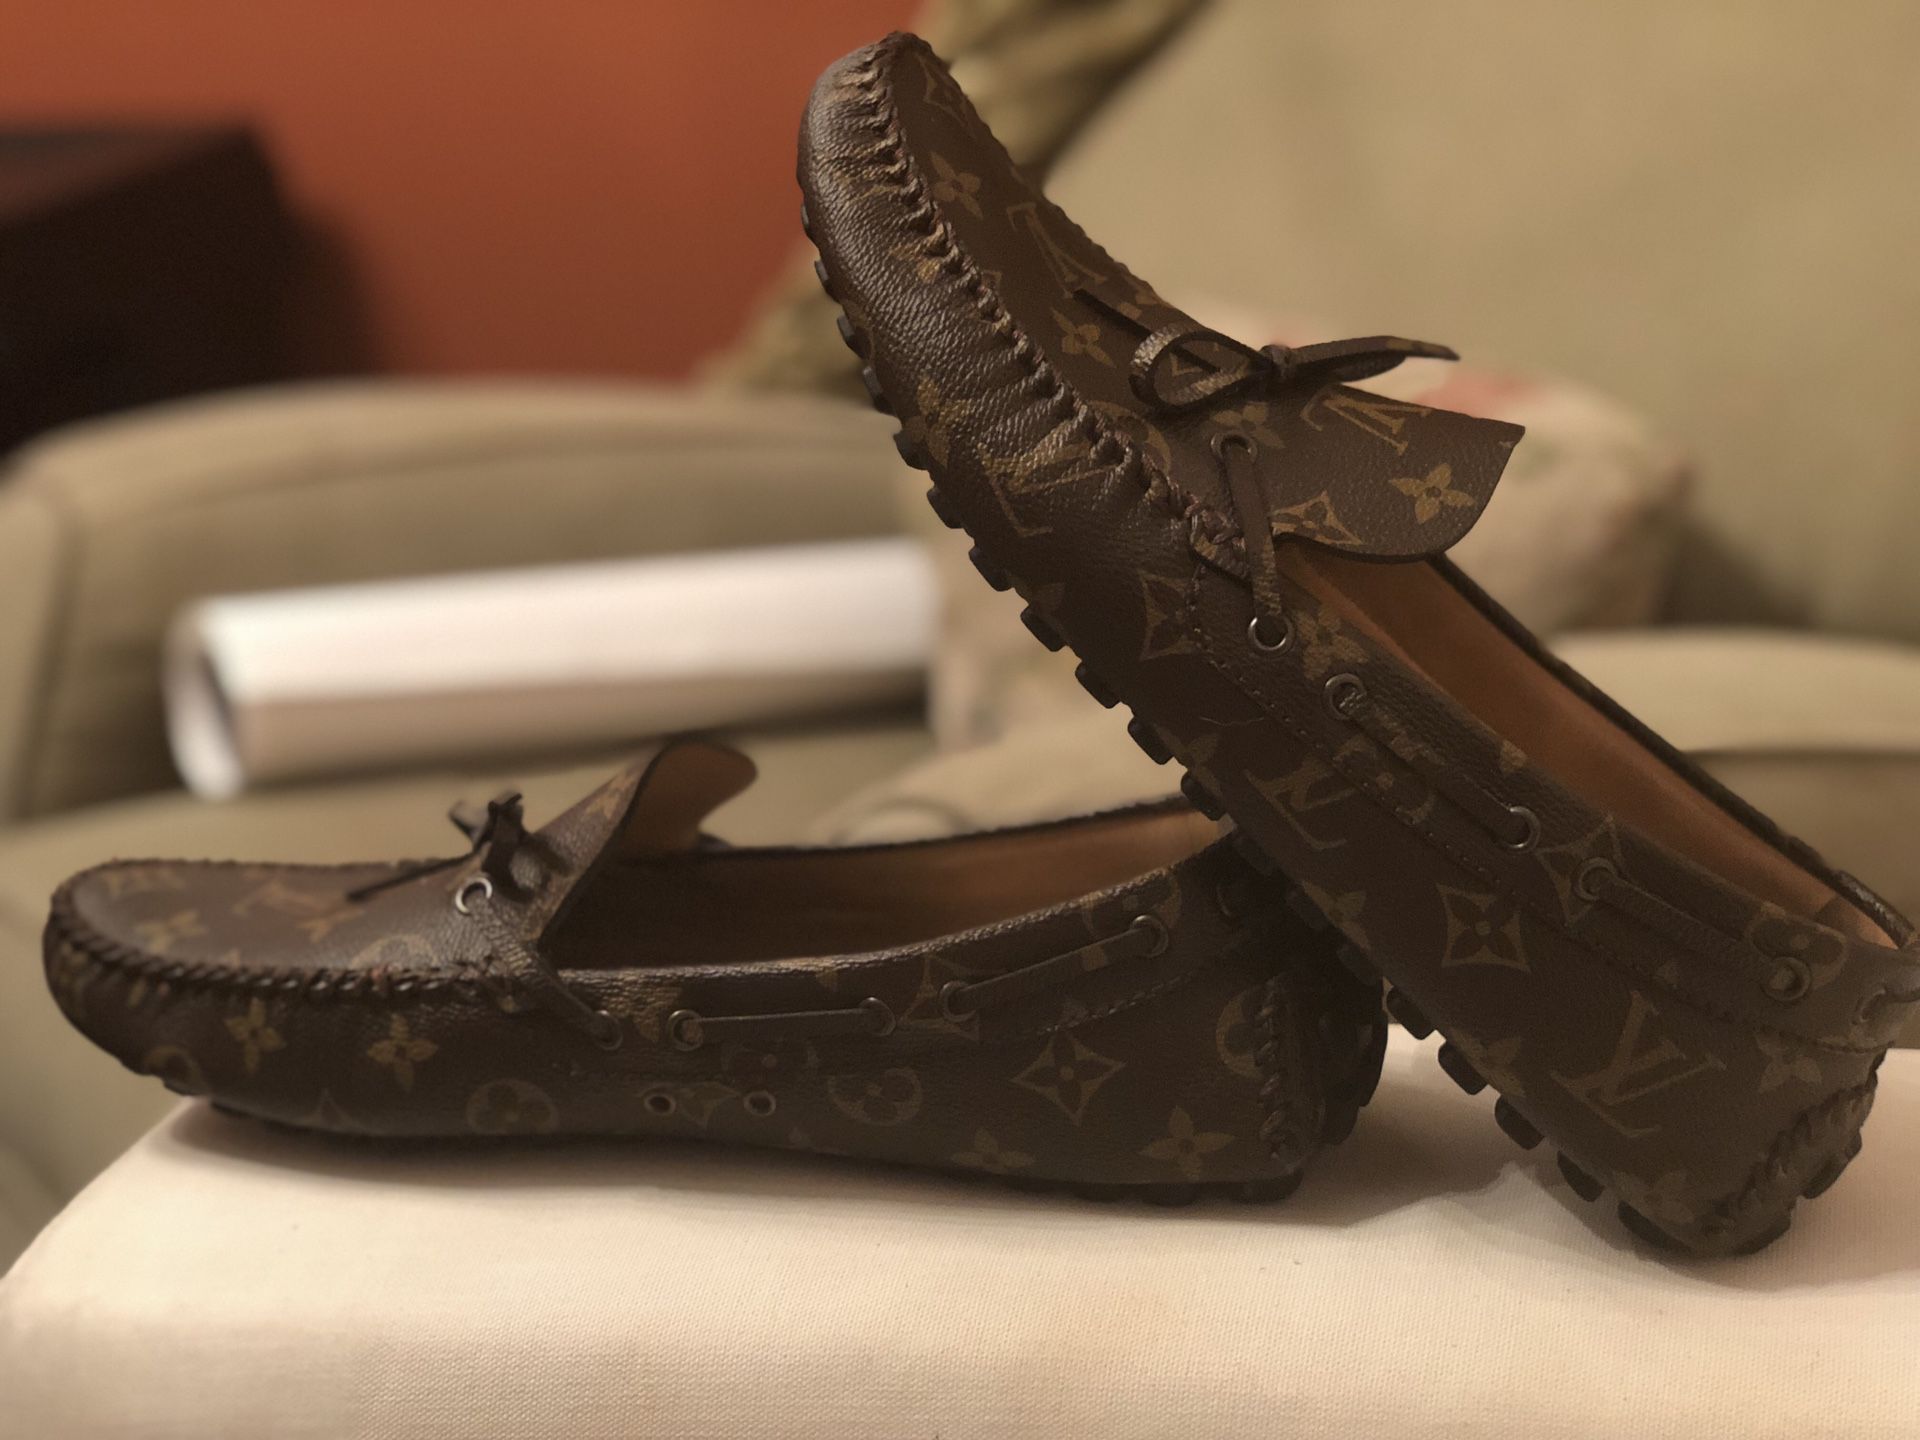 Louis Vuitton Mink Slides Size 7 for Sale in Tustin, CA - OfferUp